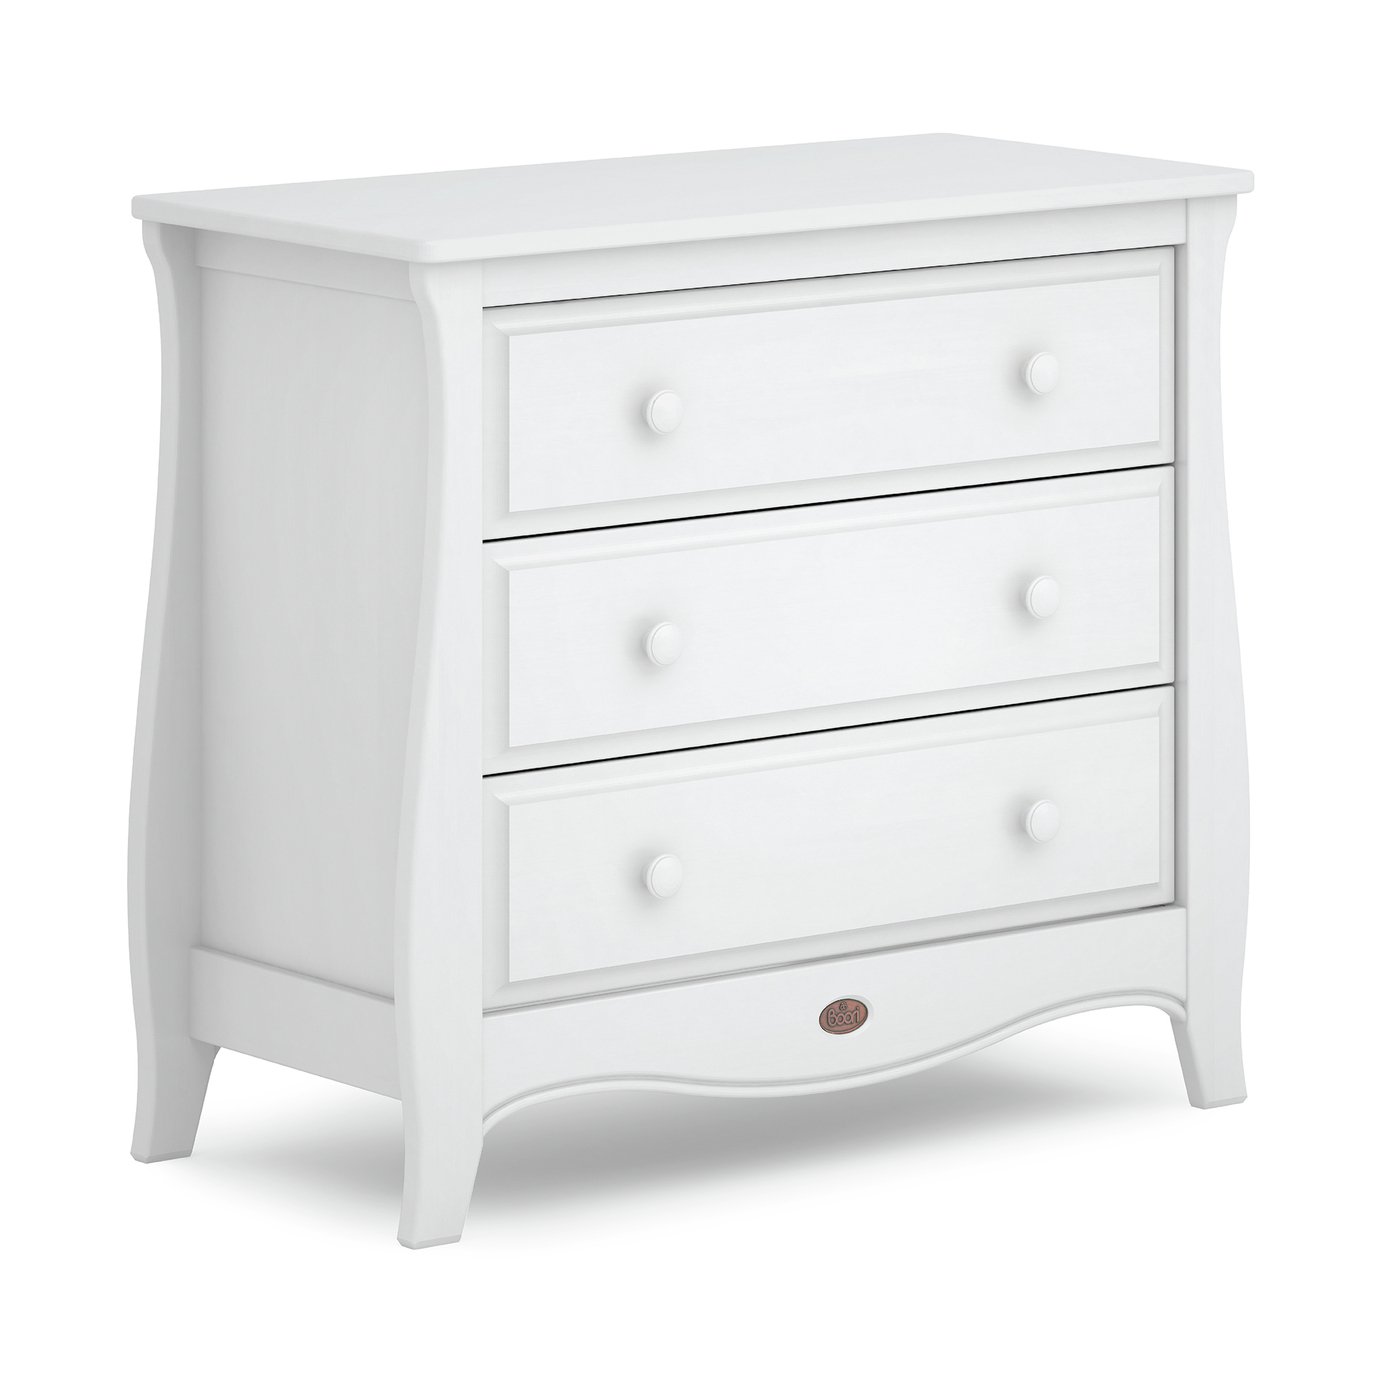 nursery chest of drawers